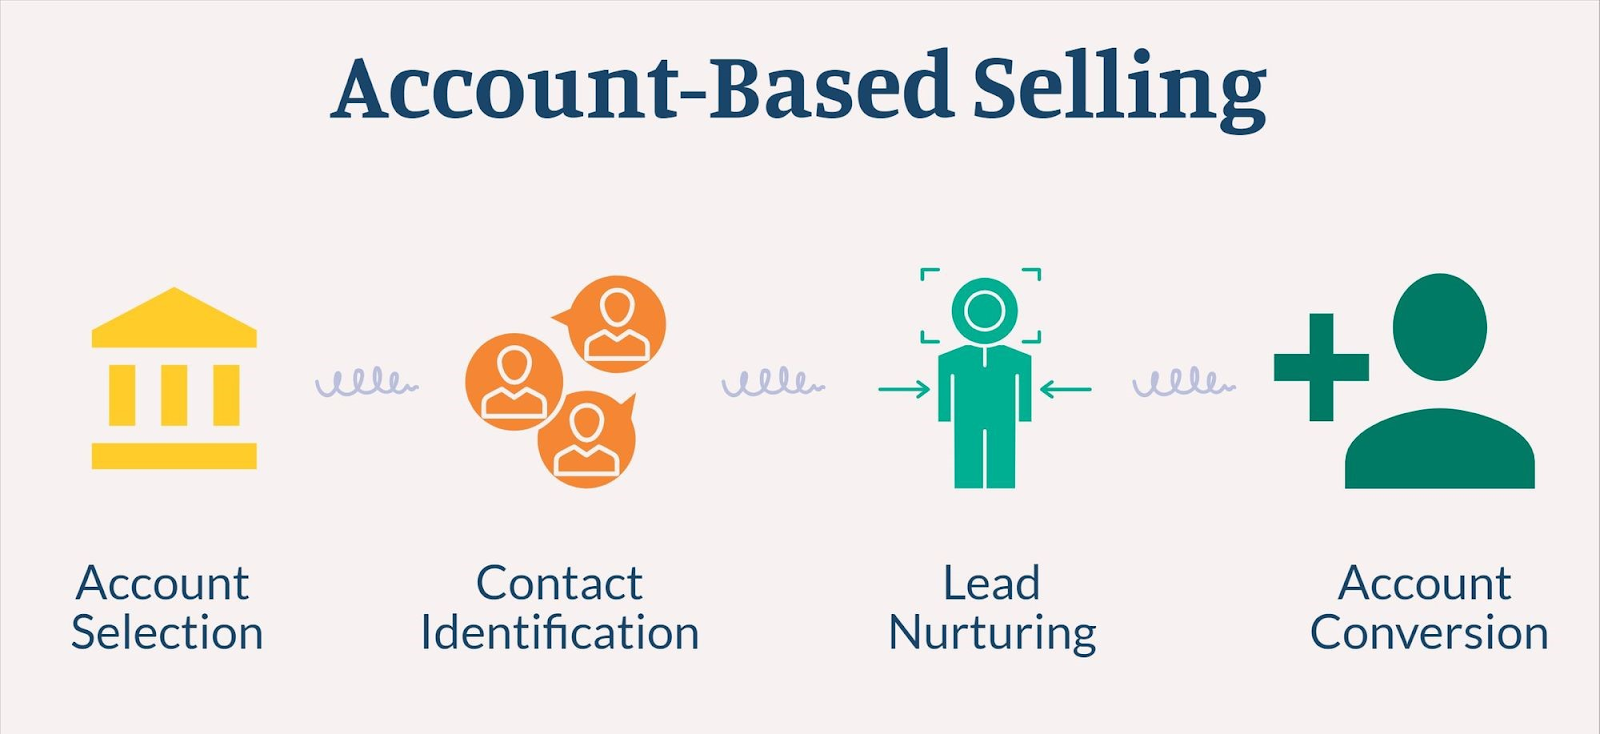 Advanced Sales Techniques to Sell: Account-Based Selling (ABS)